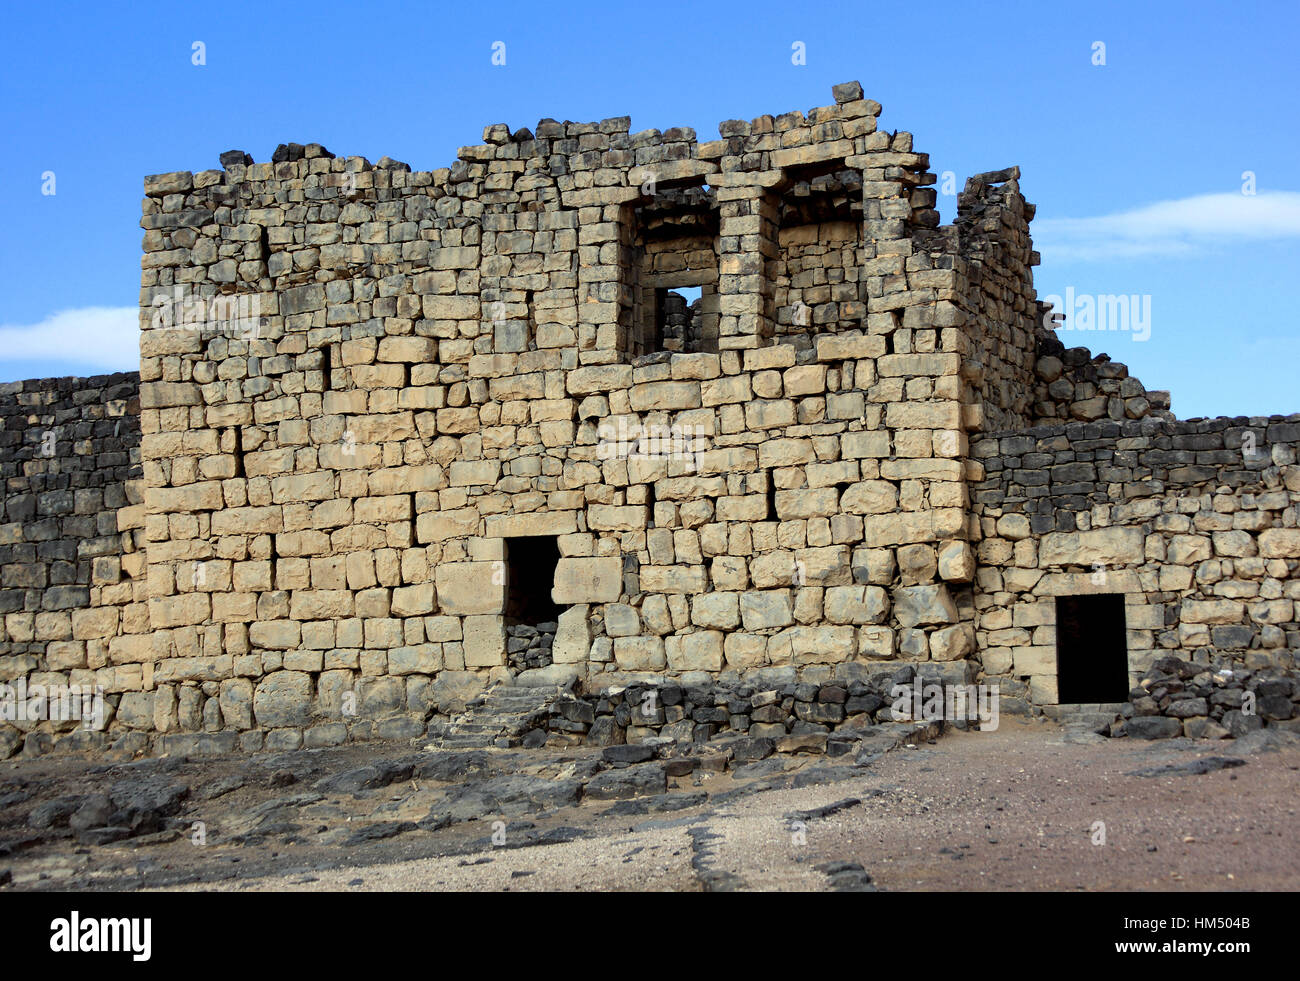 Qasr al-Azraq, Blue Fortress, a large fortress located in Jordan. It is one of the desert castles Stock Photo